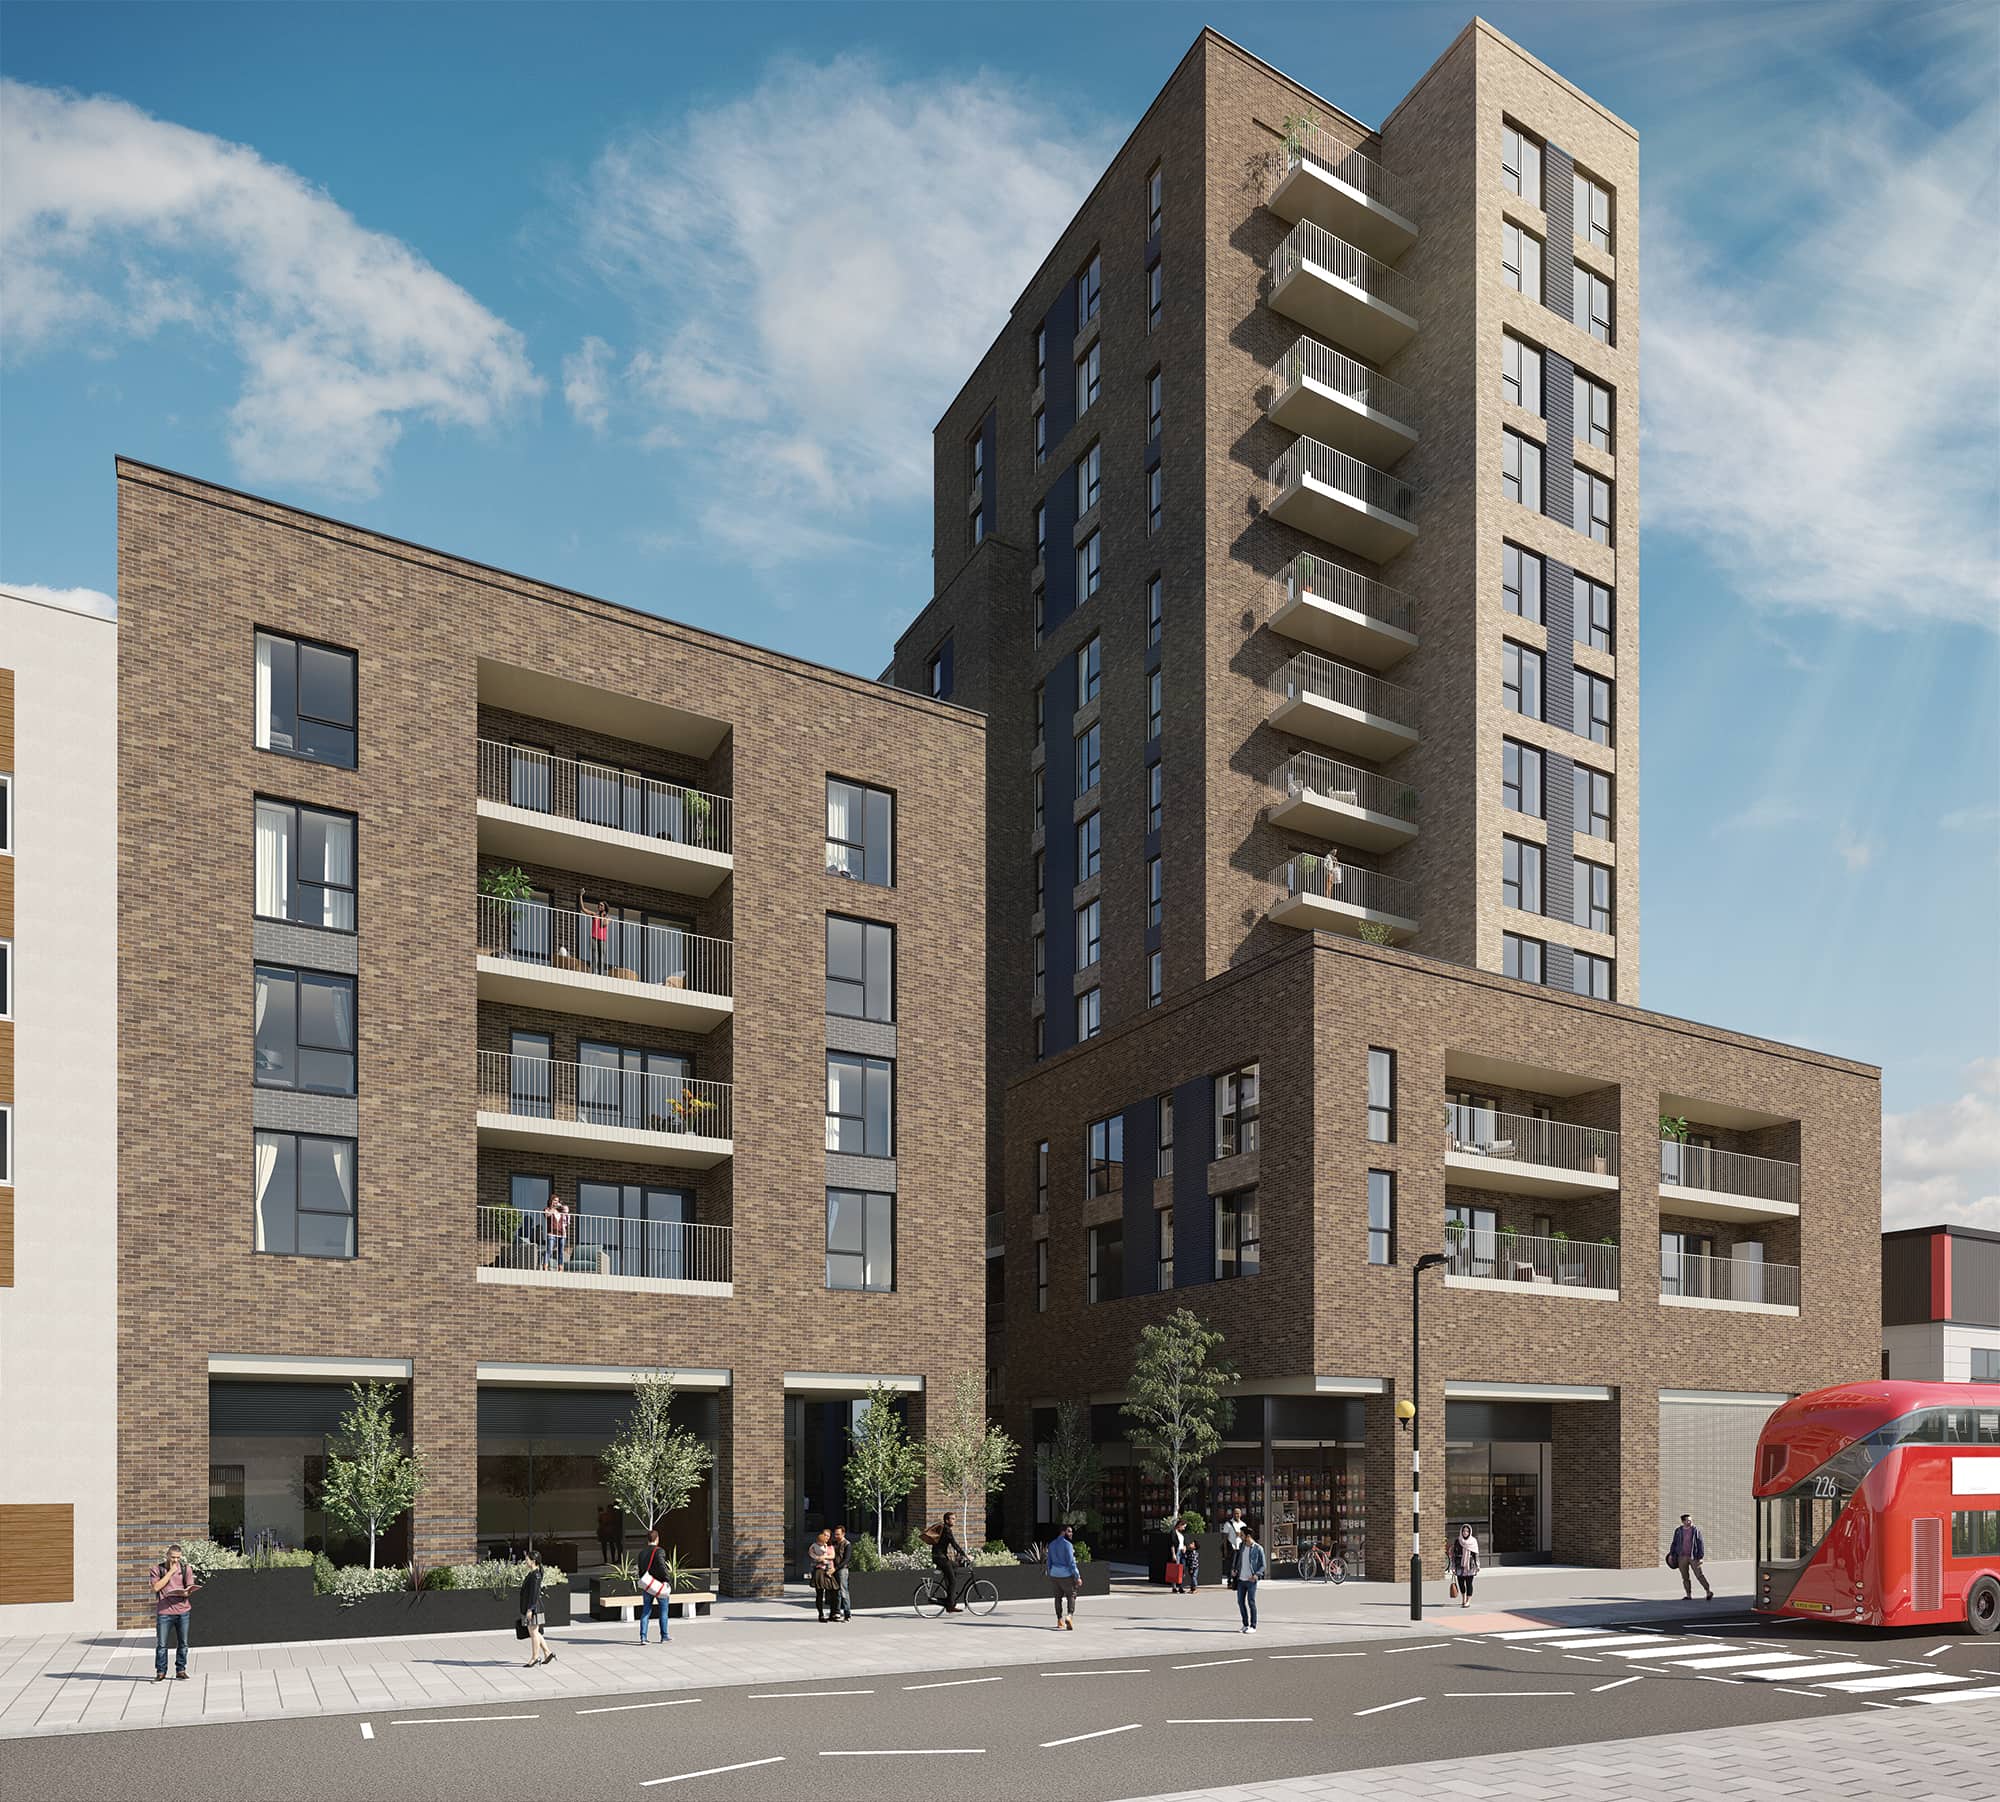 External CGI of Network Homes' Acton Works - Shared Ownership homes available on Share to Buy